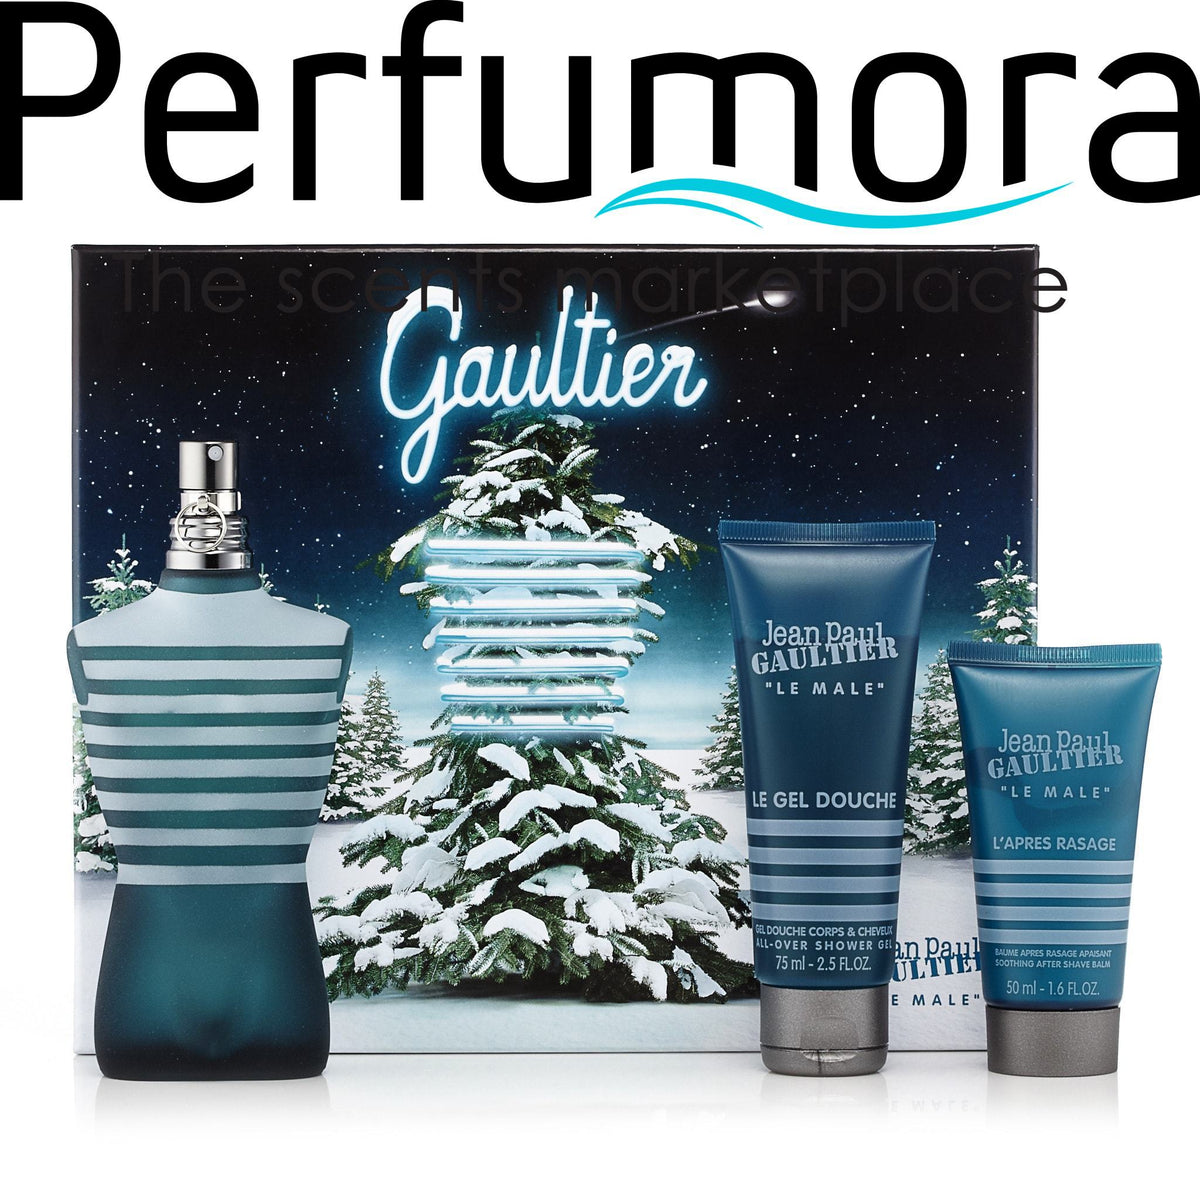 Jean Paul Gaultier Gift Set EDT, Shower Gel and After Shave Balm for Men by Jean Paul Gaultier 4.2 oz.